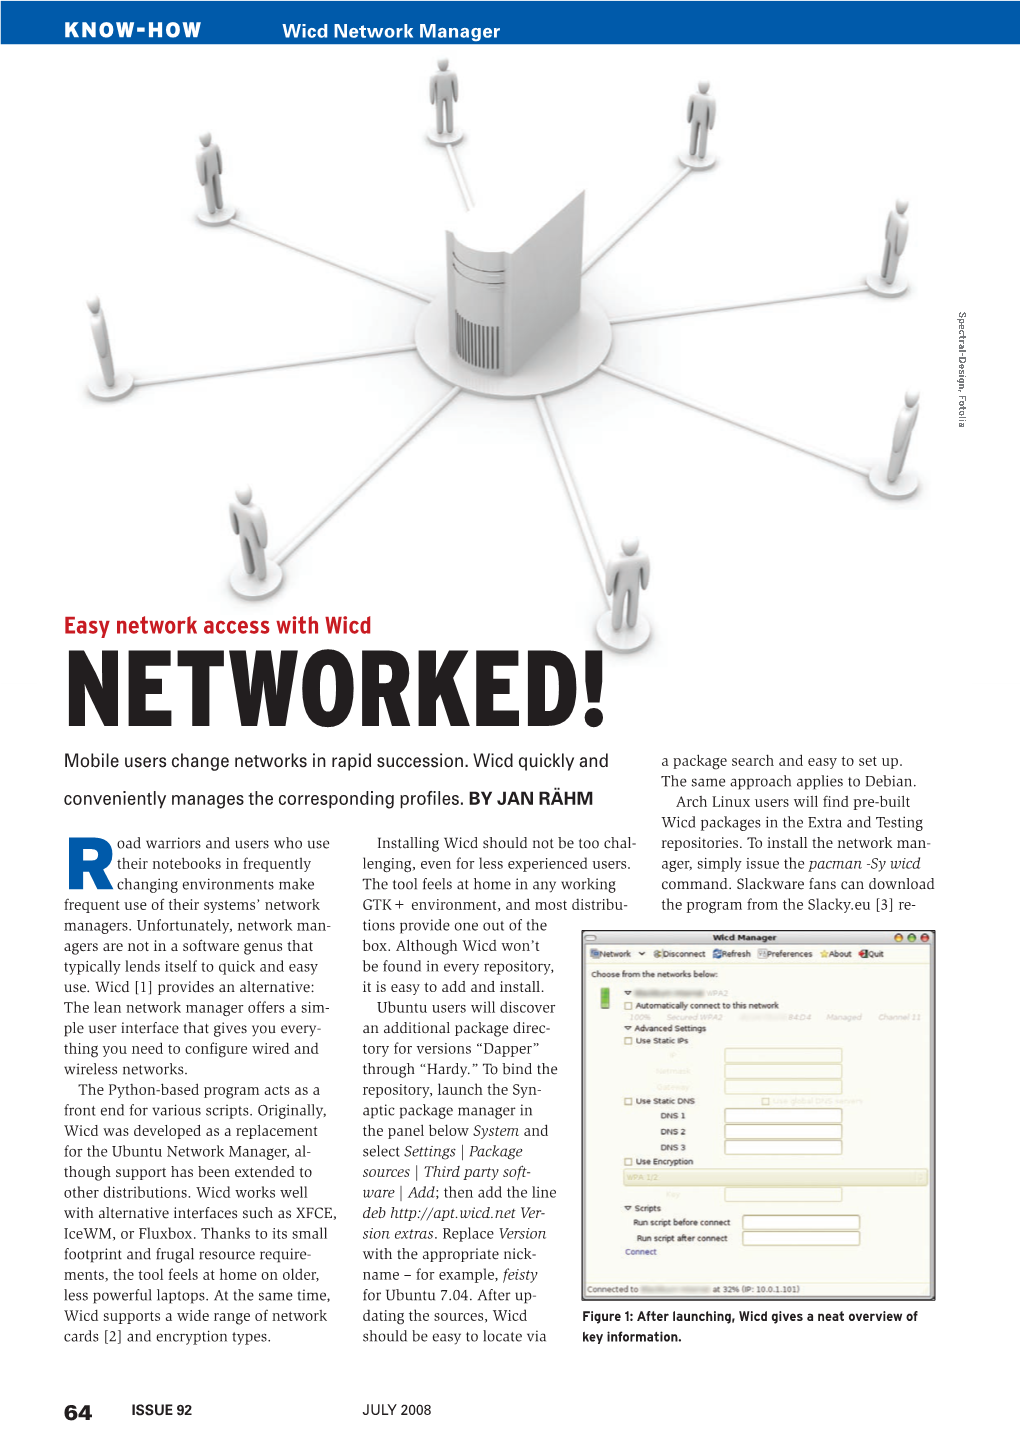 NETWORKED! Mobile Users Change Networks in Rapid Succession